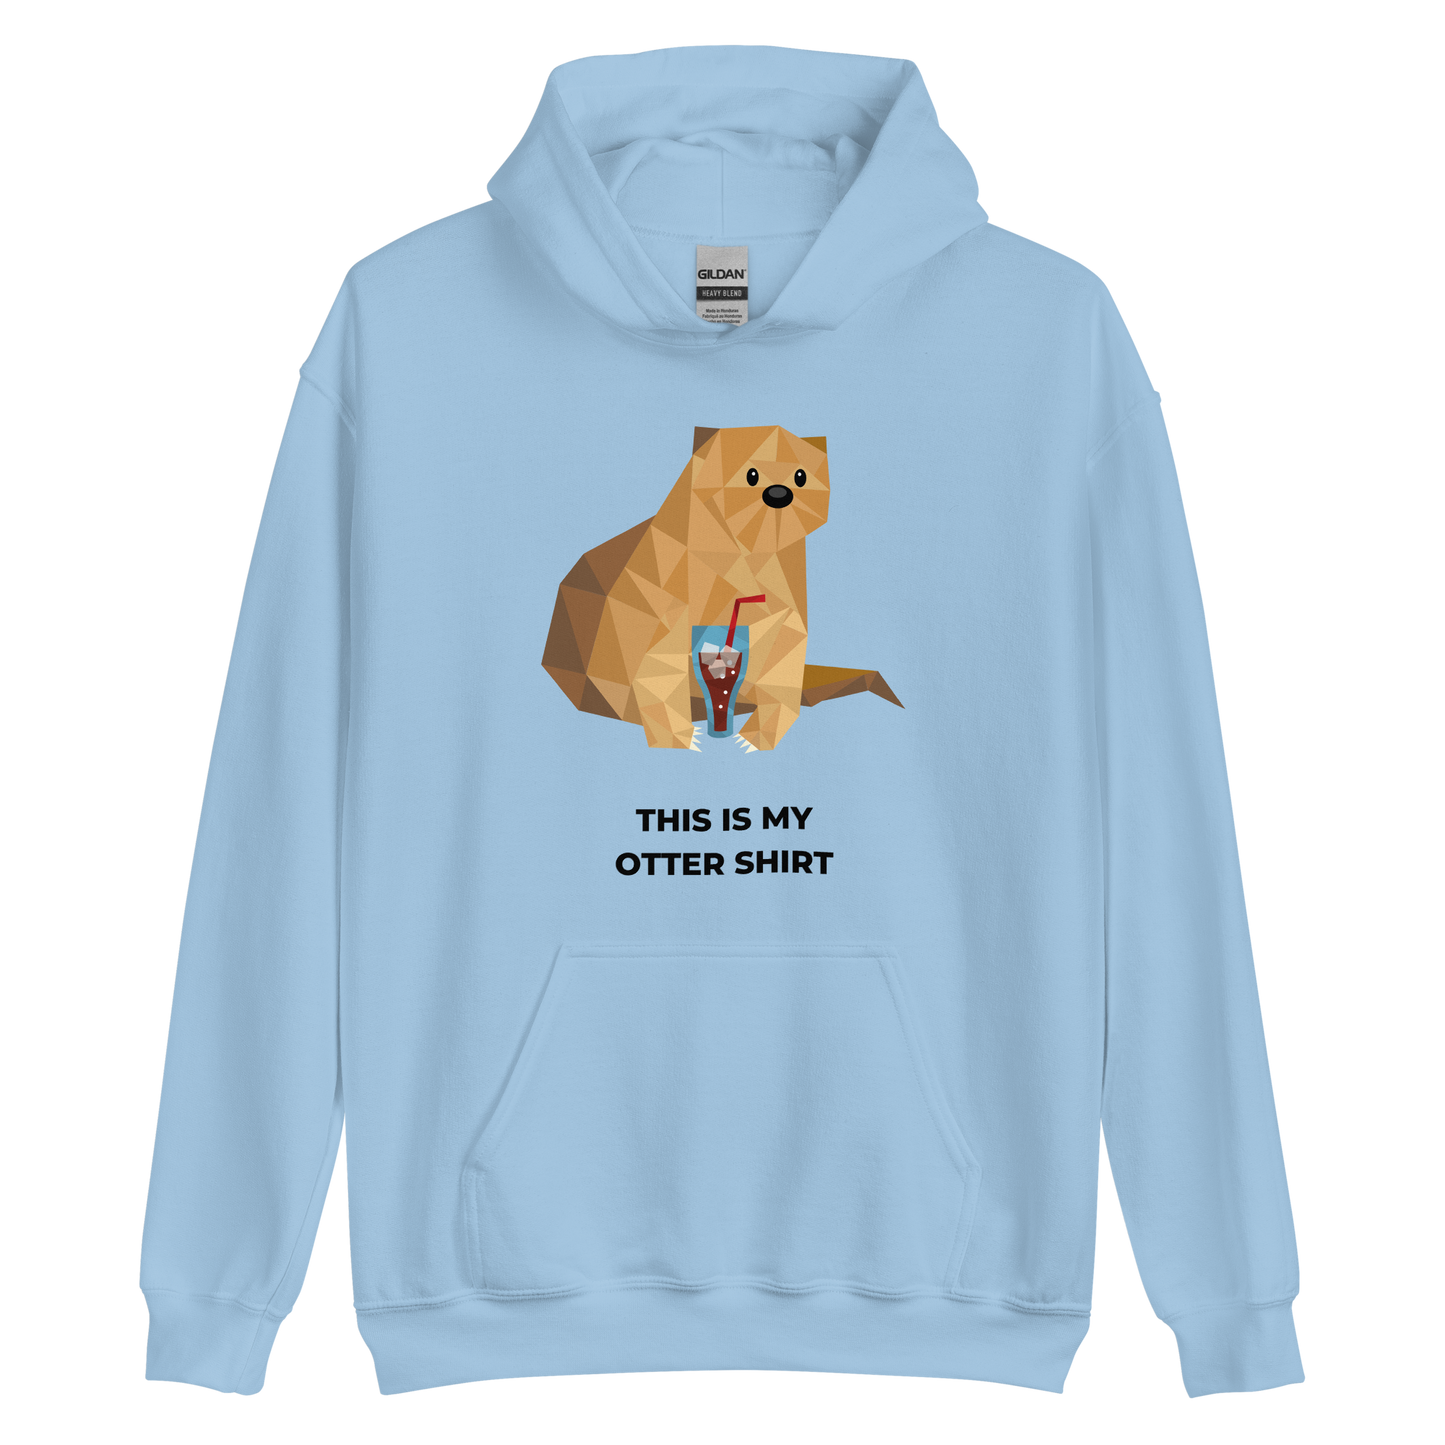 Light Blue Otter Hoodie featuring an adorably playful This Is My Otter Shirt graphic on the chest - Funny Graphic Otter Hoodies - Boozy Fox